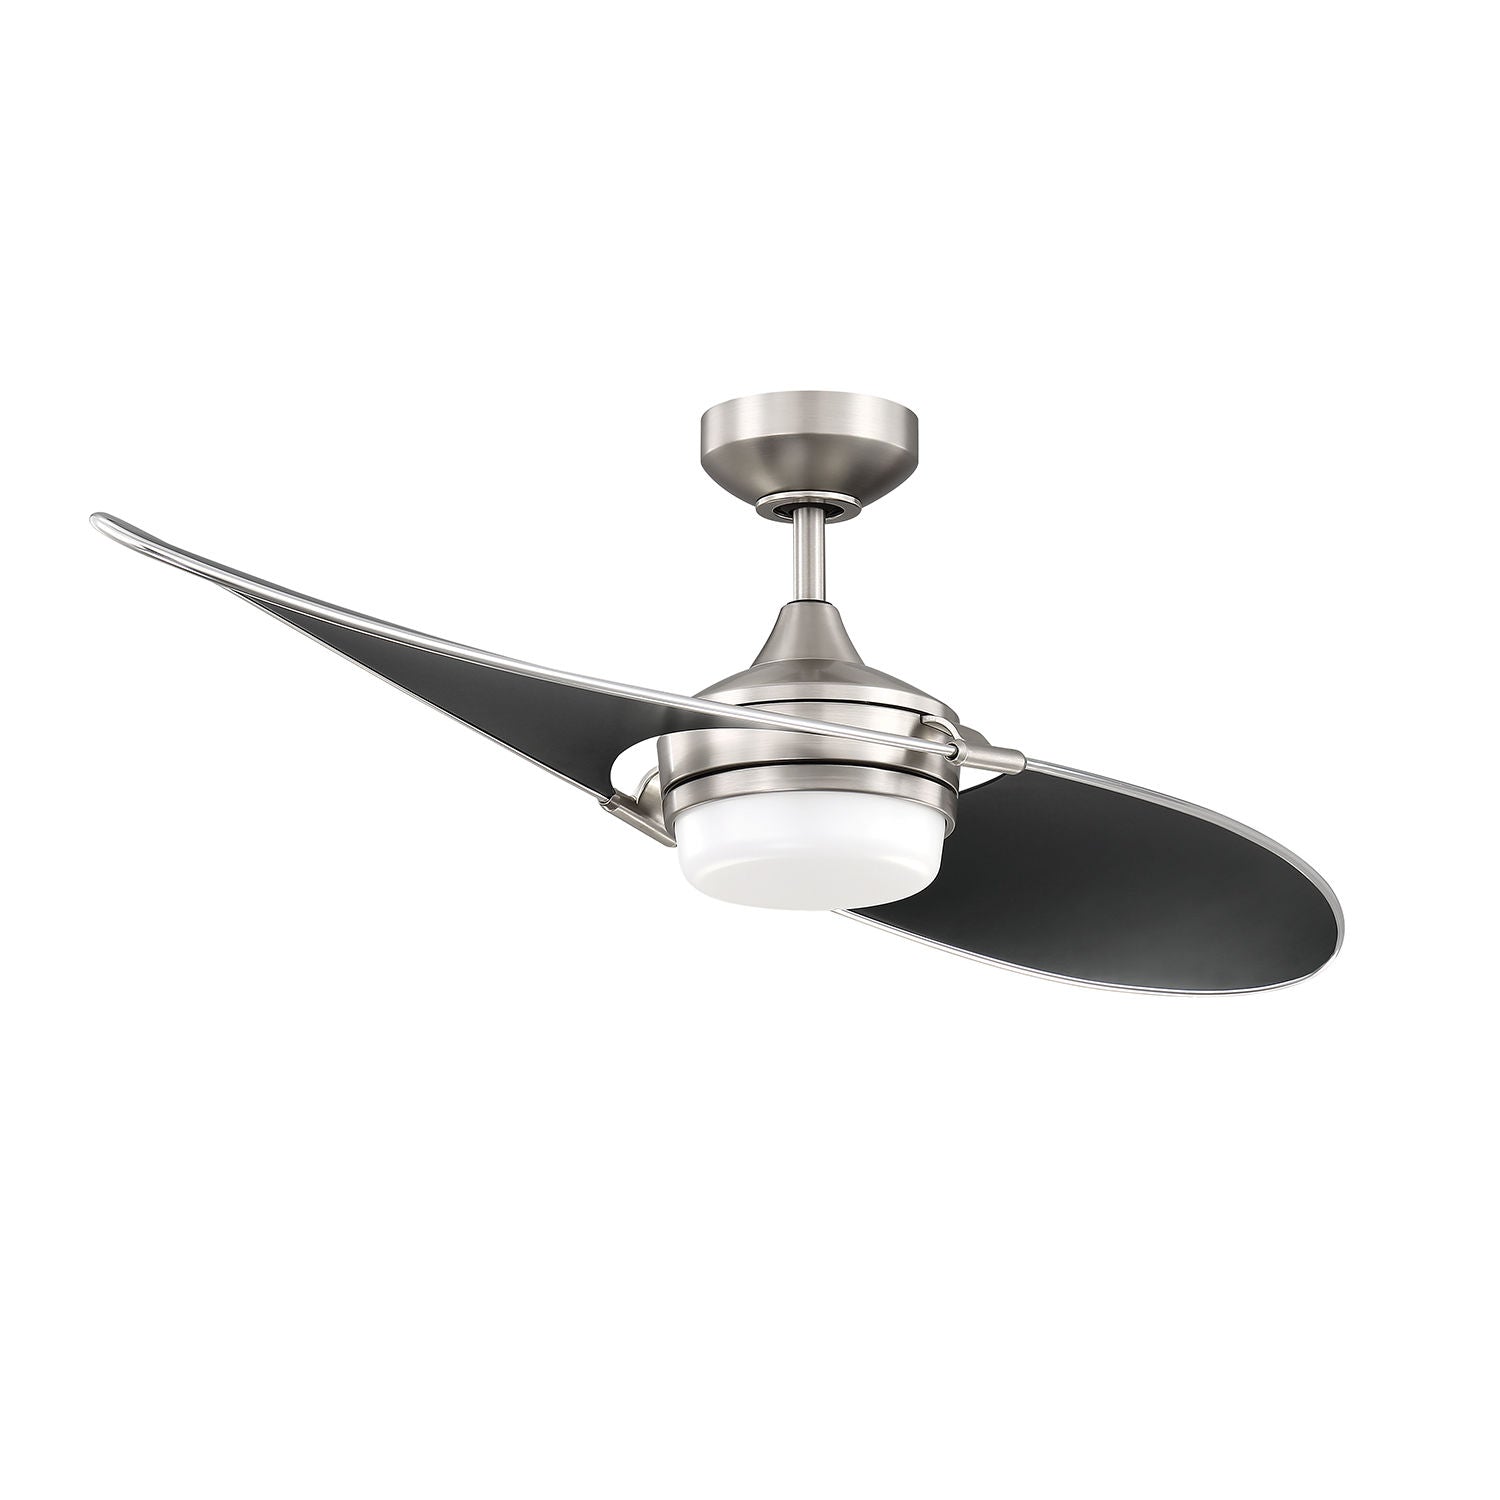 TANGO Ceiling fan Stainless steel, Black INTEGRATED LED - AC22852-SN/BLK | KENDAL